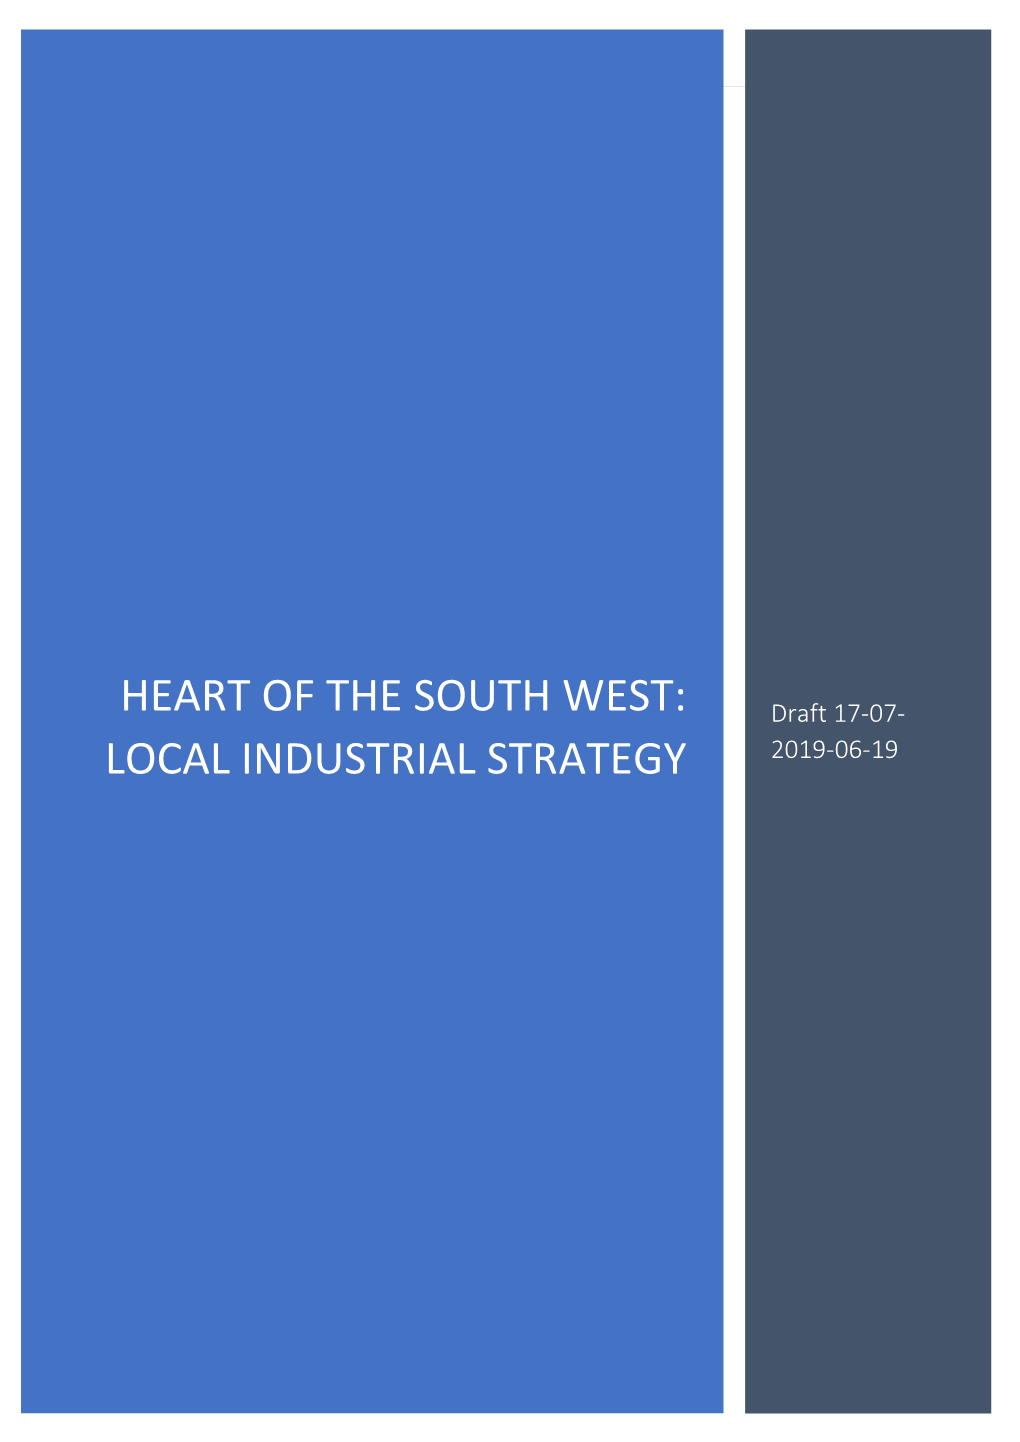 Local Industrial Strategy 2019-06-19